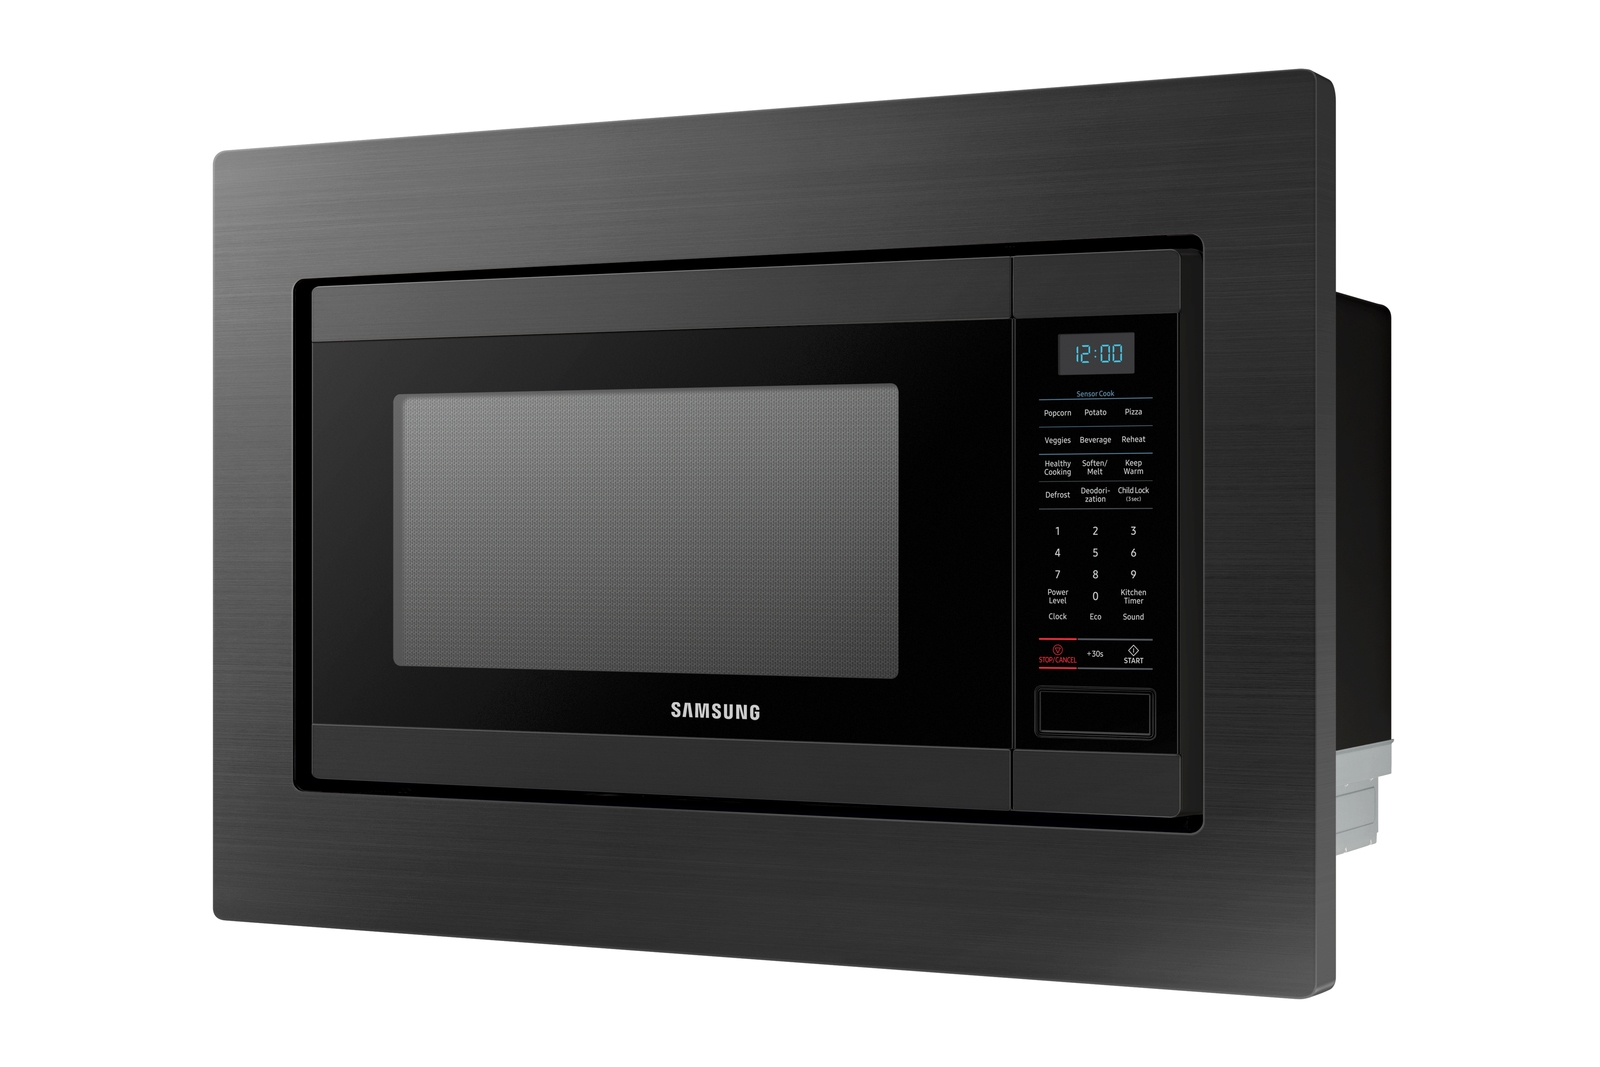 Thumbnail image of 1.9 cu. ft. Countertop Microwave for Built-In Application in Fingerprint Resistant Black Stainless Steel